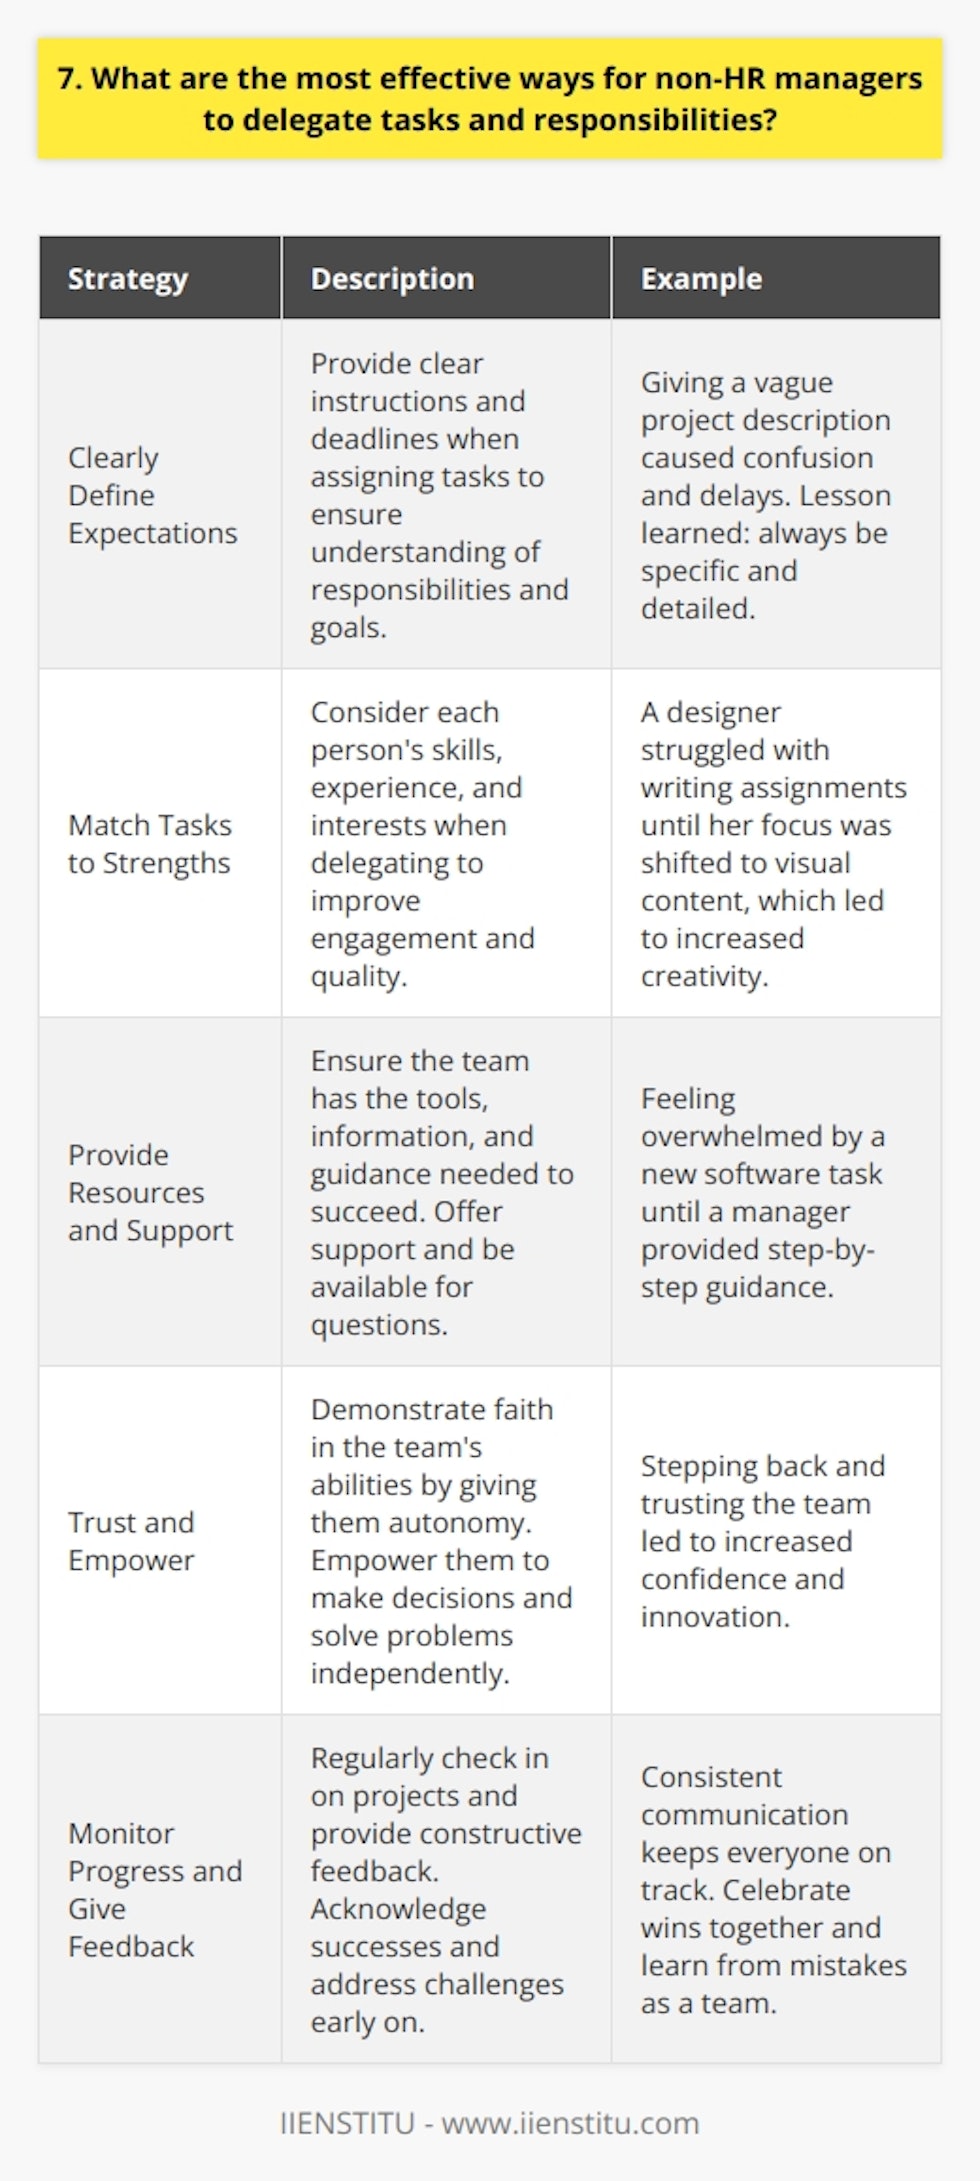 As a non-HR manager, delegating tasks effectively is crucial for team productivity and success. Here are some strategies Ive found helpful: Clearly Define Expectations When assigning a task, provide clear instructions and deadlines. Ensure the team member understands their responsibilities and goals. I once gave a vague project description, causing confusion and delays. Lesson learned: always be specific and detailed. Match Tasks to Strengths Consider each persons skills, experience, and interests when delegating. Assigning tasks that align with their strengths improves engagement and quality. Our designer struggled with writing assignments until we shifted her focus to visual content. Her creativity skyrocketed! Provide Resources and Support Ensure your team has the tools, information, and guidance they need to succeed. Offer support and be available for questions. I remember feeling overwhelmed by a new software task until my manager walked me through it step-by-step. Trust and Empower Demonstrate faith in your teams abilities by giving them autonomy. Empower them to make decisions and solve problems independently. Micromanaging stifles growth. When I stepped back and trusted my team, their confidence and innovation soared. Monitor Progress and Give Feedback Regularly check in on projects and provide constructive feedback. Acknowledge successes and address challenges early on. Consistent communication keeps everyone on track. Celebrate wins together and learn from mistakes as a team. Effective delegation is a skill that takes practice, patience, and emotional intelligence. Lead with empathy, clarity, and trust to bring out the best in your team.